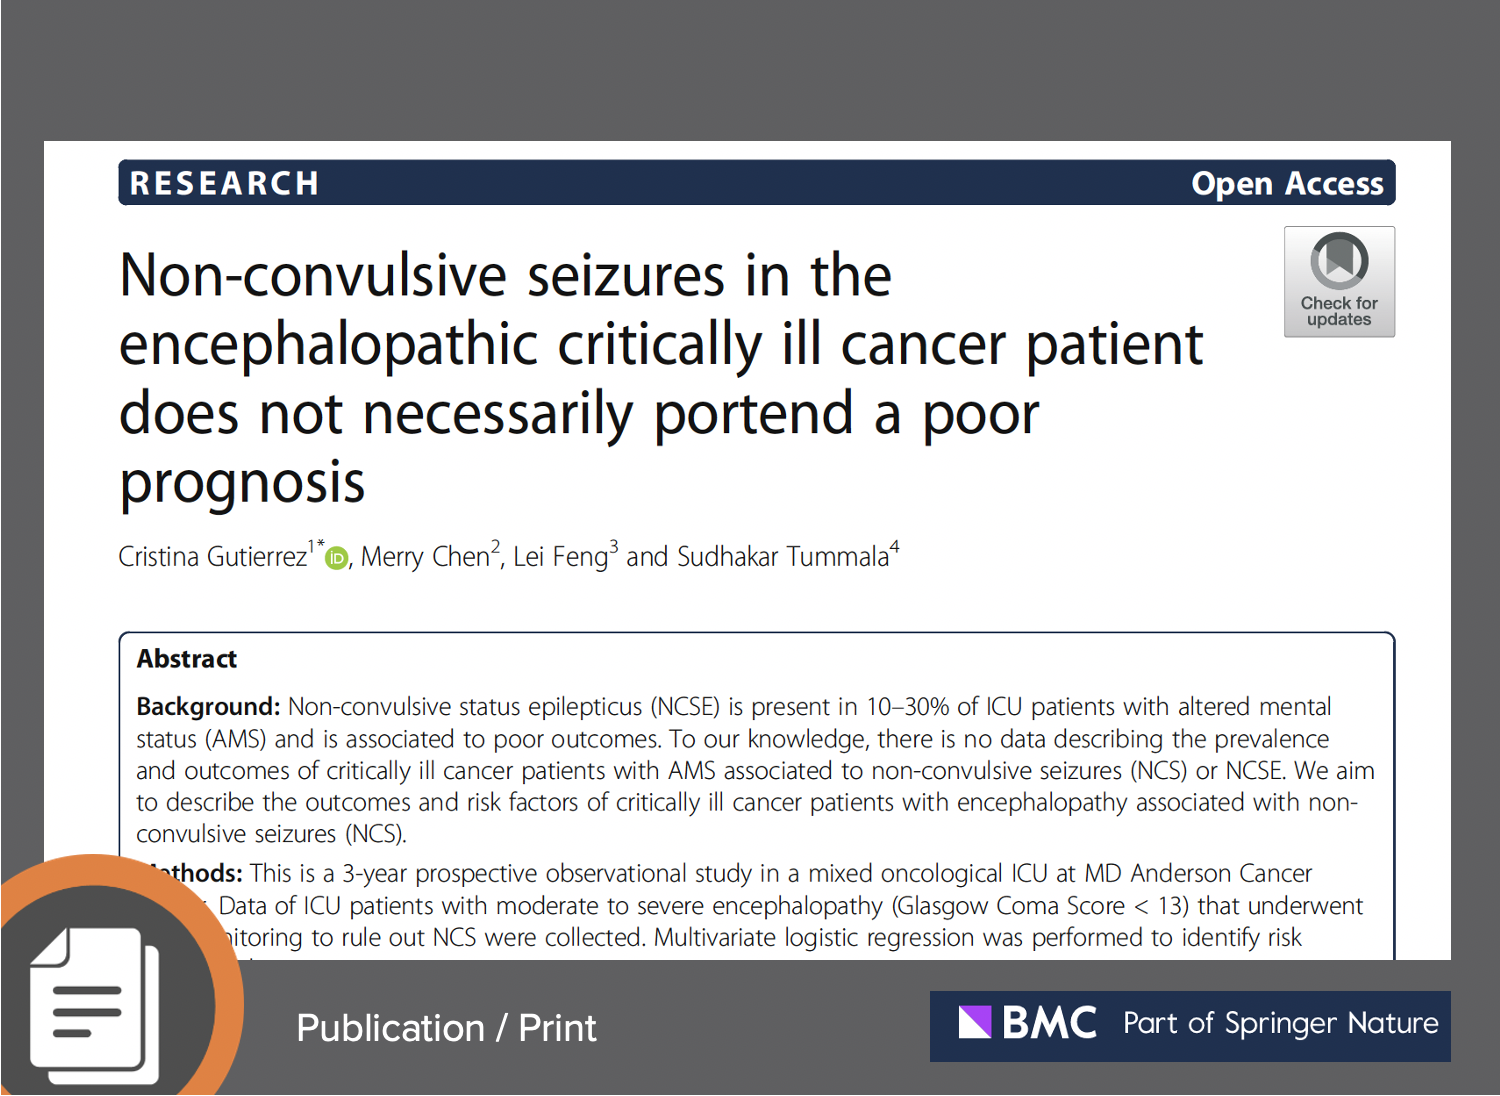 Non-Convulsive Seizures in the Encephalopathic Critically Ill Cancer Patient Does Not Necessarily Portend a Poor Prognosis